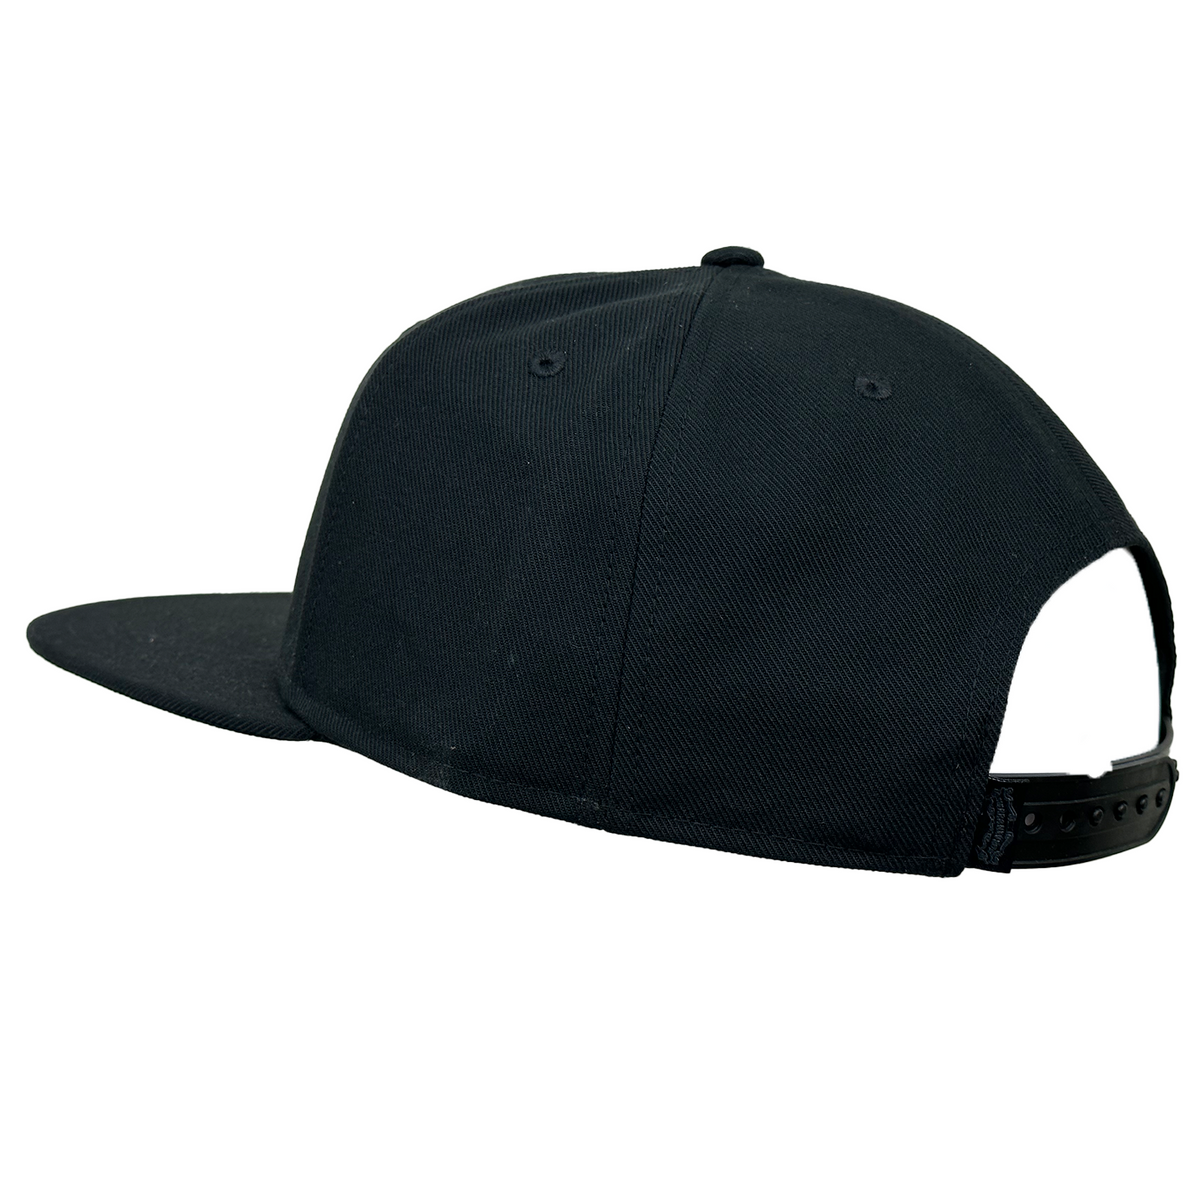 Sierra Nevada Stacked Text Hat Black - back view